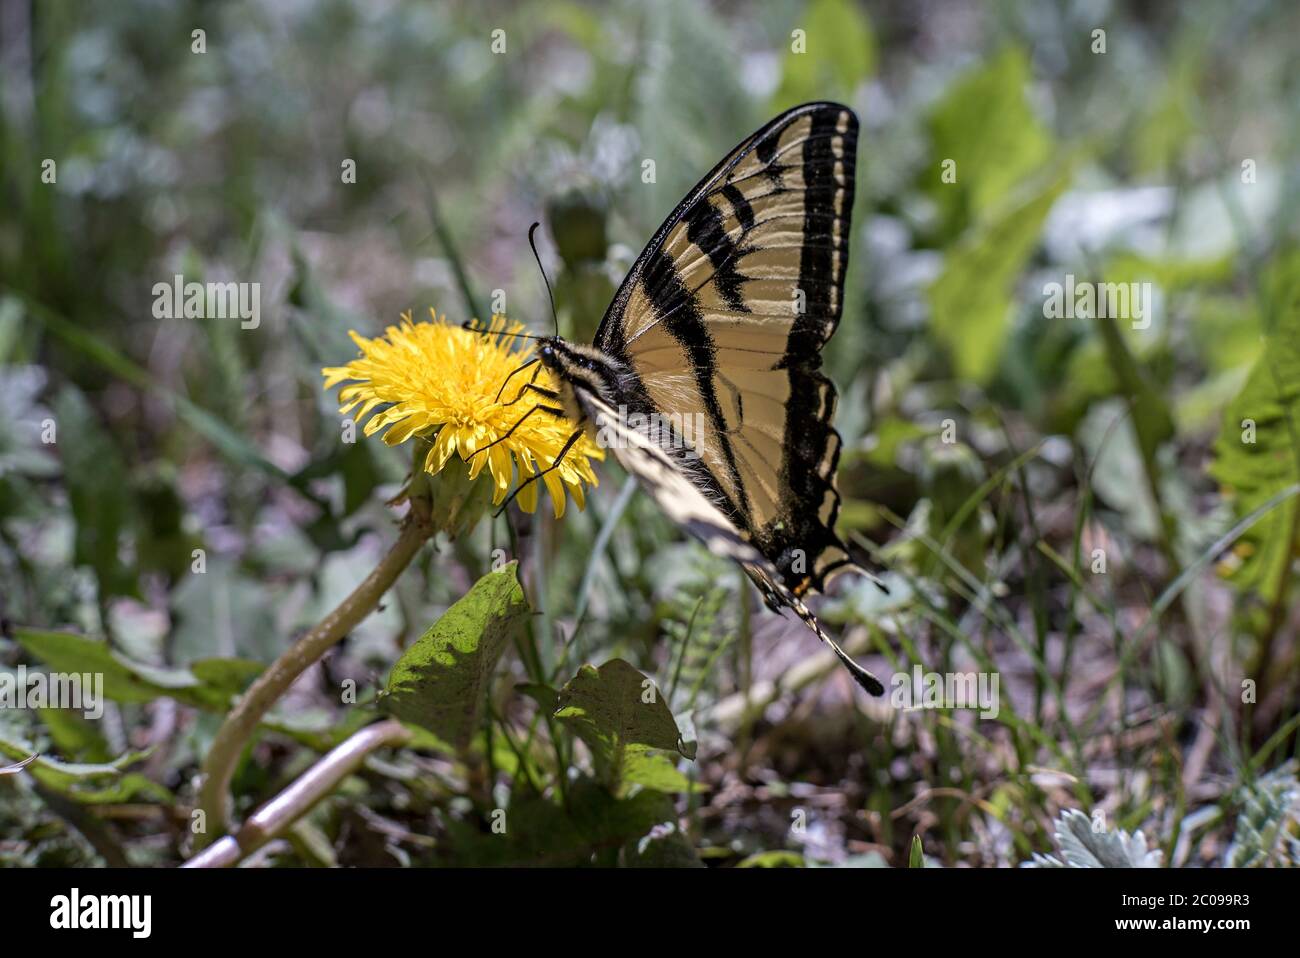 Female Western Tiger Swallowtail Butterfly (Papilio rutulus) Gathering Nectar from a Dandelion (Taraxacum officinale) Brown's Creek Trail, Colorado Stock Photo